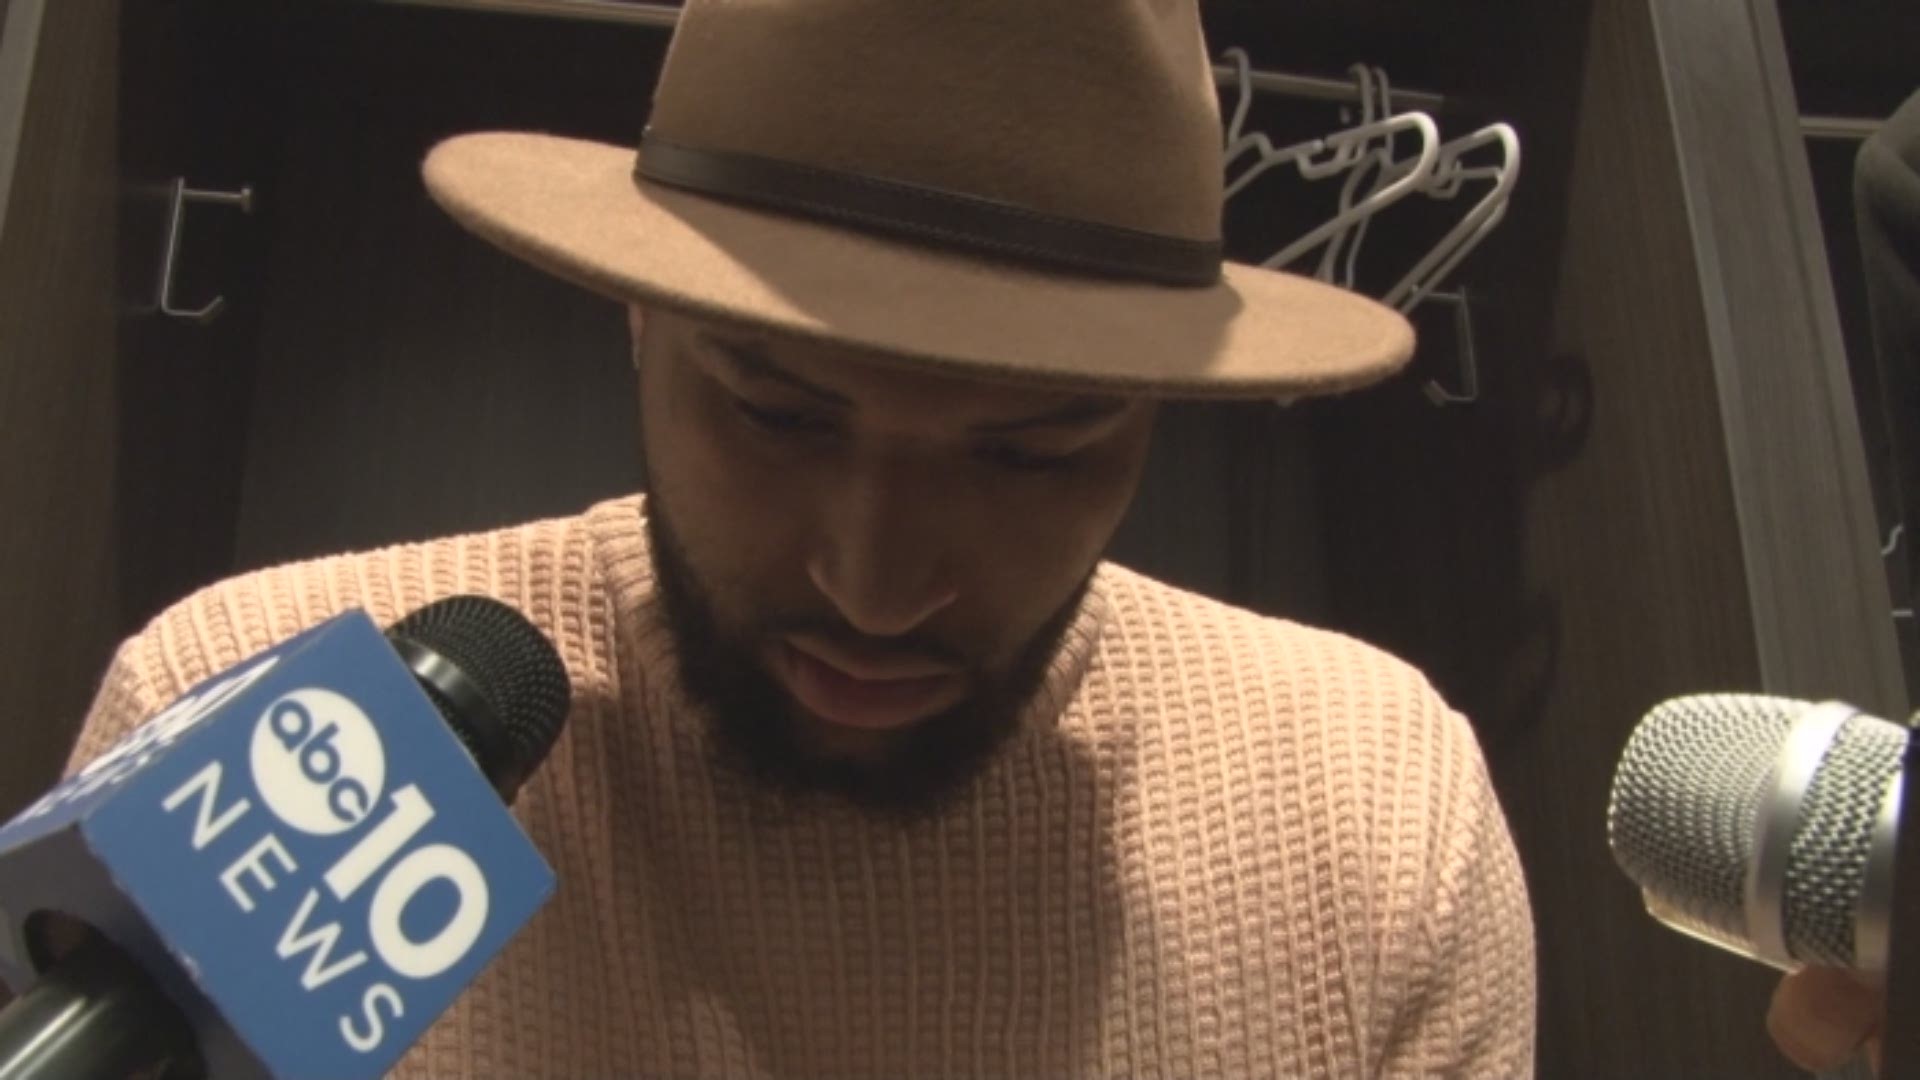 Sacramento Kings center DeMarcus Cousins talks about Wednesday's home loss to the Indiana Pacers, where teammate Rudy Gay was carried off the floor after suffering an injury. The preliminary evaluation was that he tore his Achilles, which would be a season-ending injury. An MRI is scheduled for Thursday.